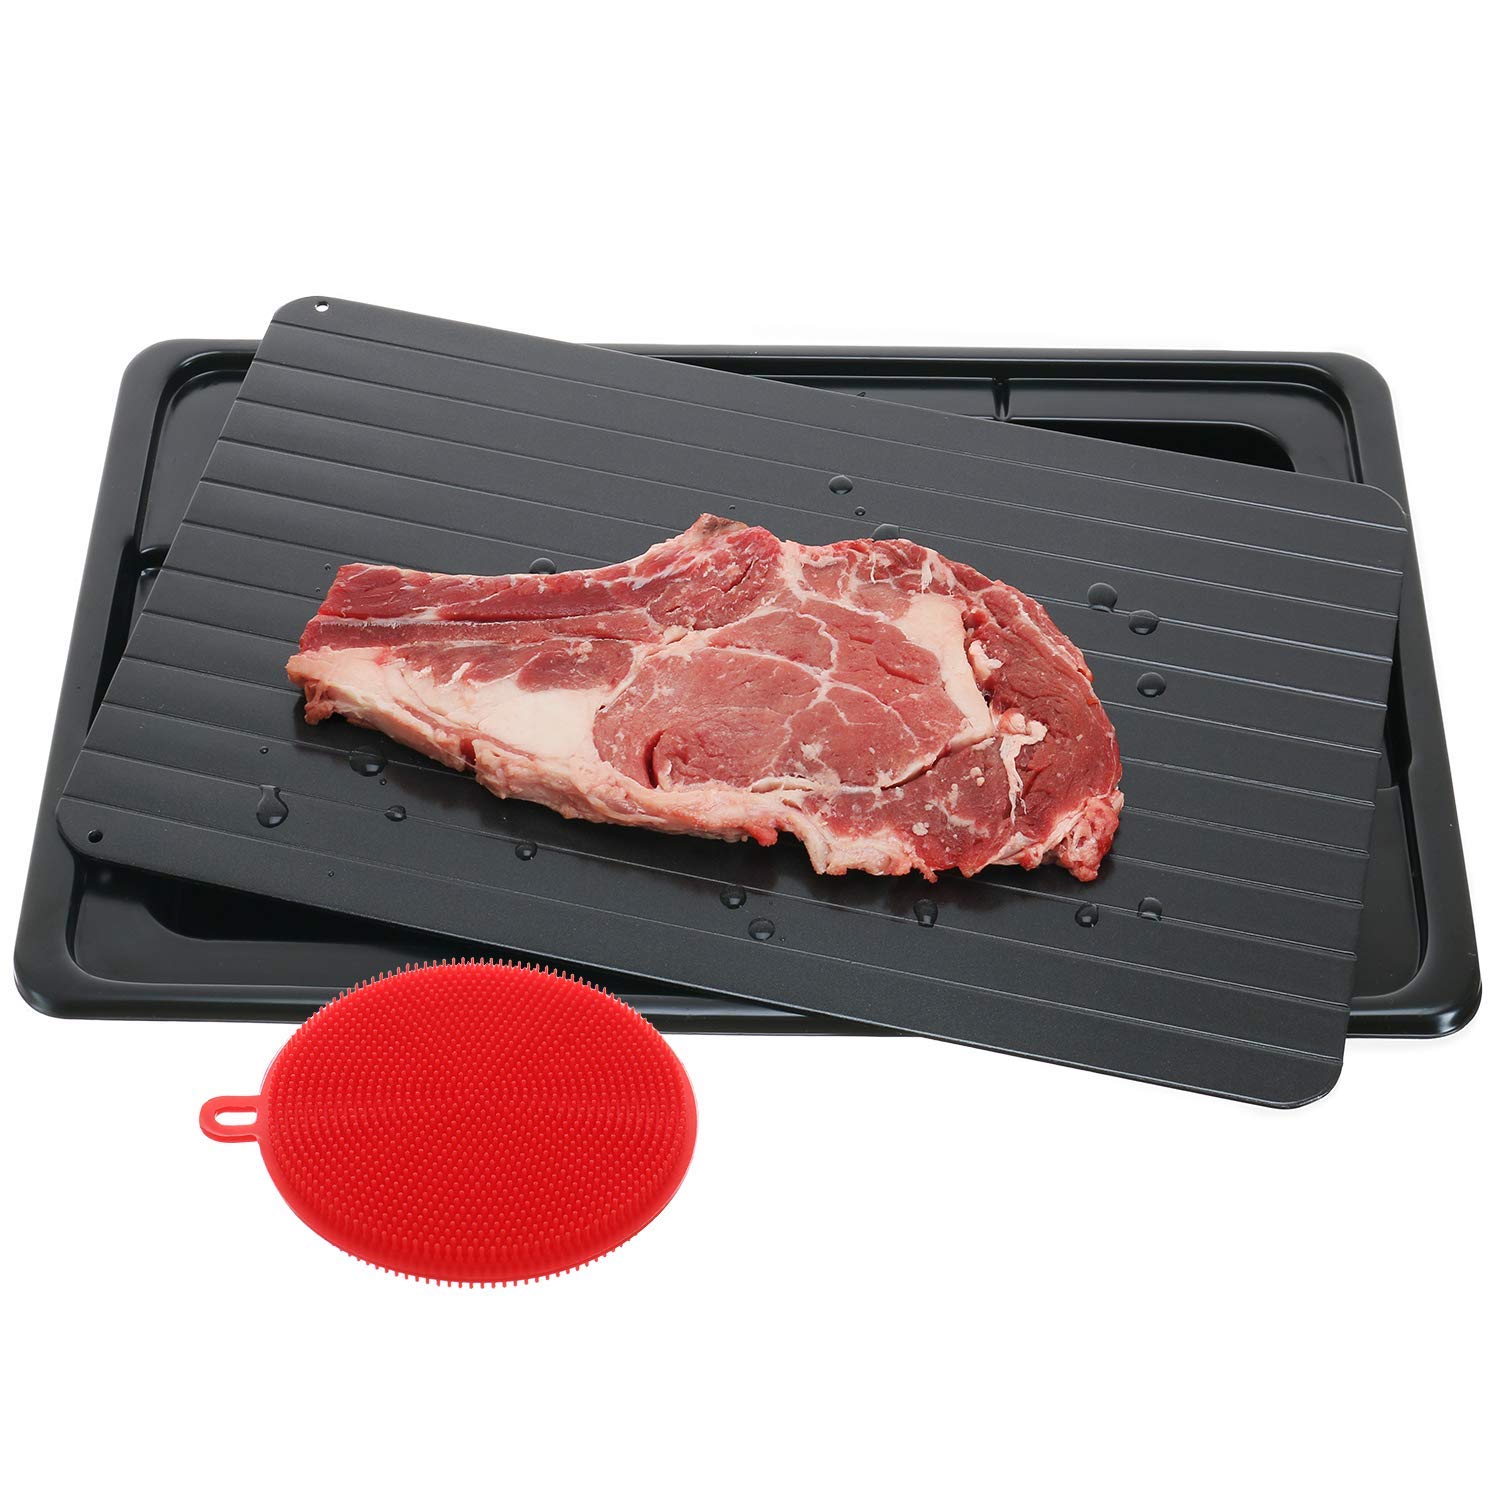 Defrosting Tray Frozen Food Thawing Plate For Fast Quick Rapid Meat Defrosting, Chicken, The Safest No Electricity, No Microwa